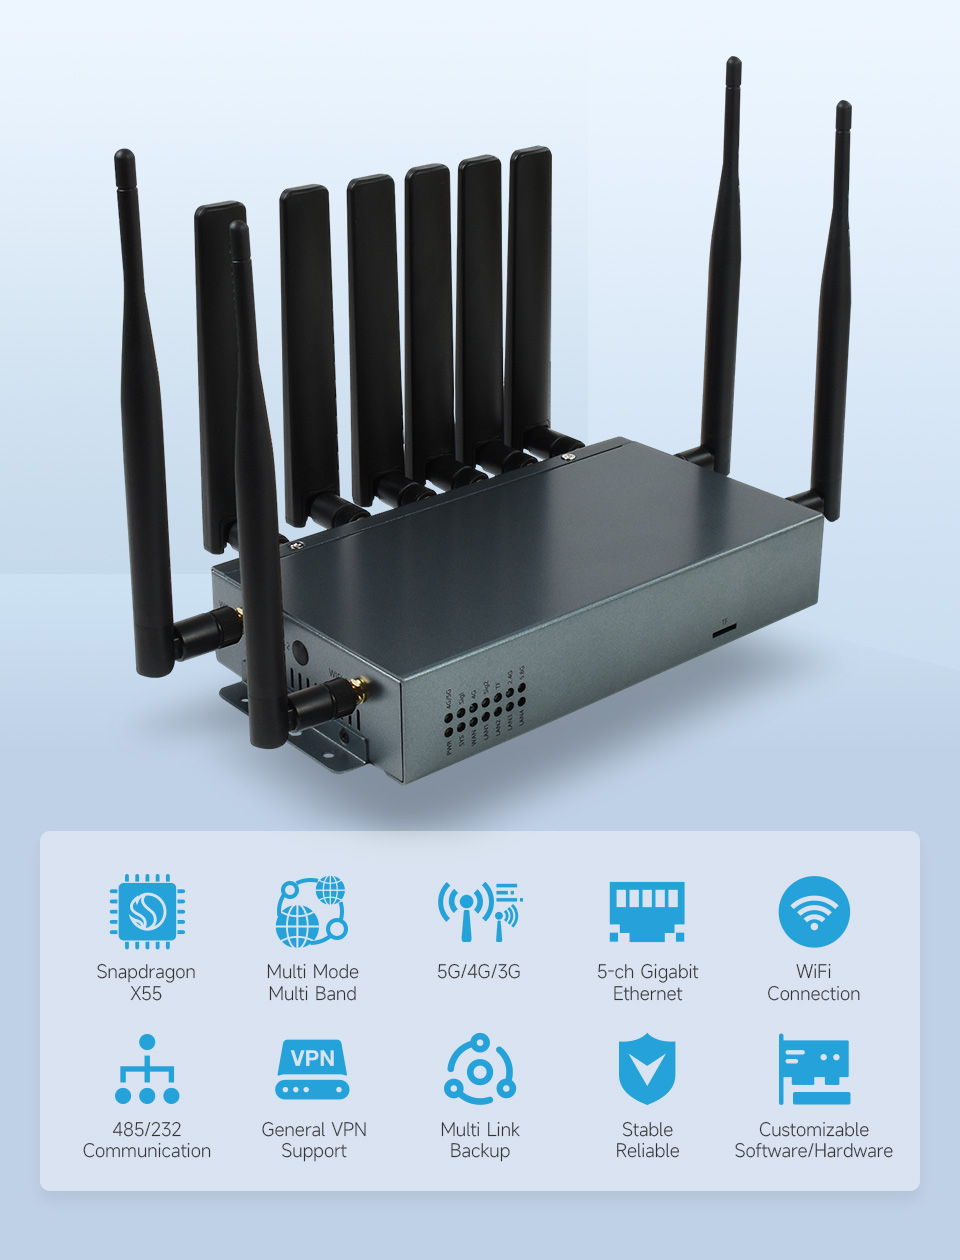 SIM8200EA-M2 Industrial 5G Router, Wireless CPE, Snapdragon X55